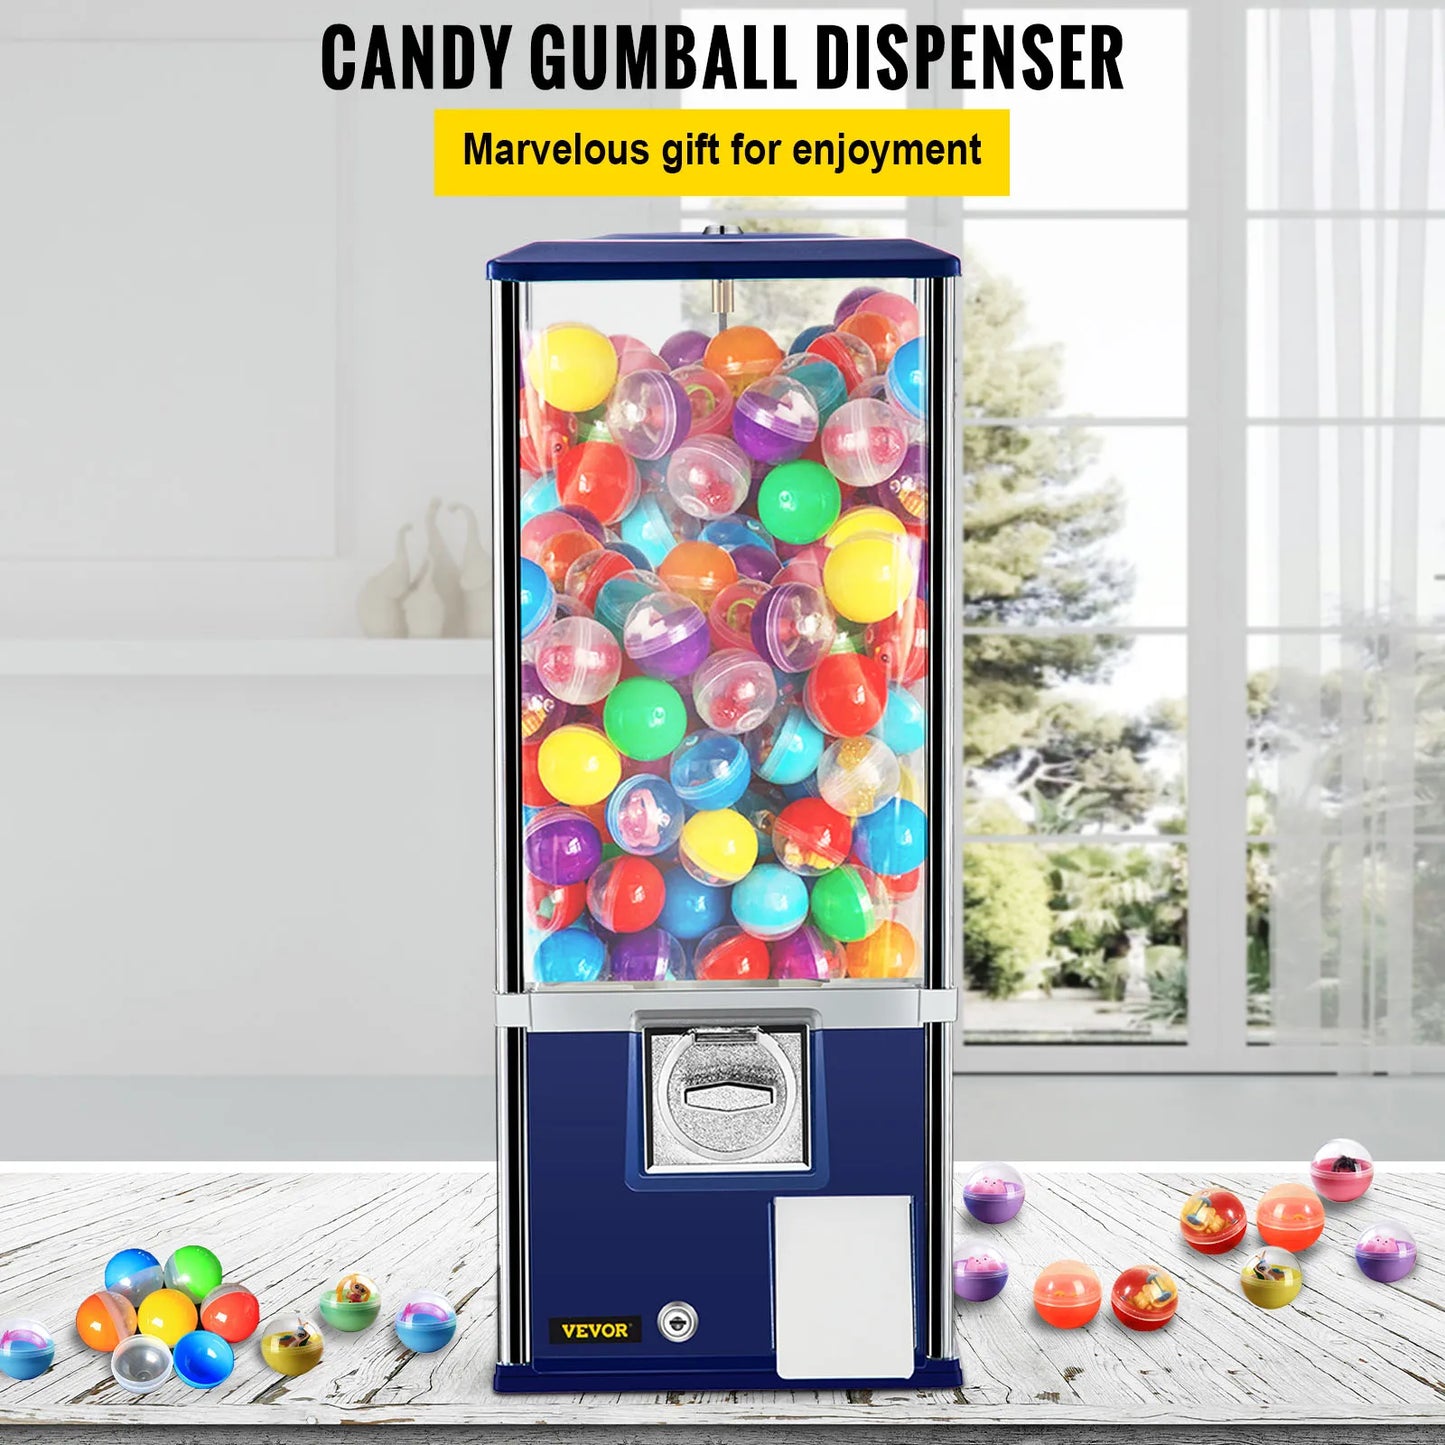 VEVOR 25.2 In Gumball Dispenser Candy Machine Huge Load Capacity Vintage Style Commercial Home Use - My Store